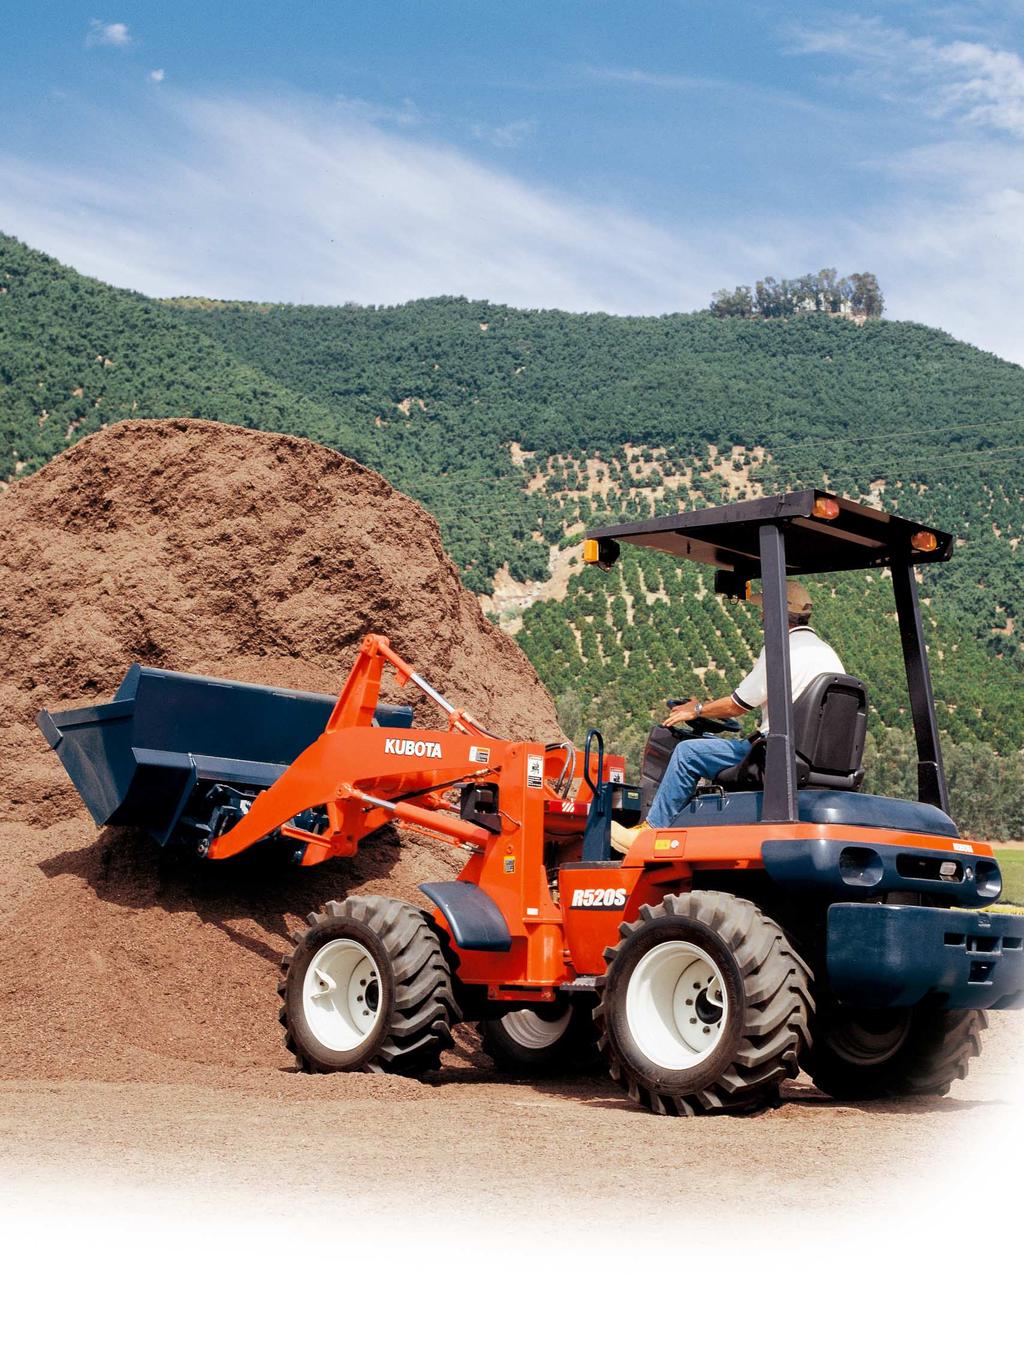 Backfilling, dozing, grappling, loading, plowing, scraping our multi-functional, compact wheel loaders can handle it all. Compact in size, but not in strength.